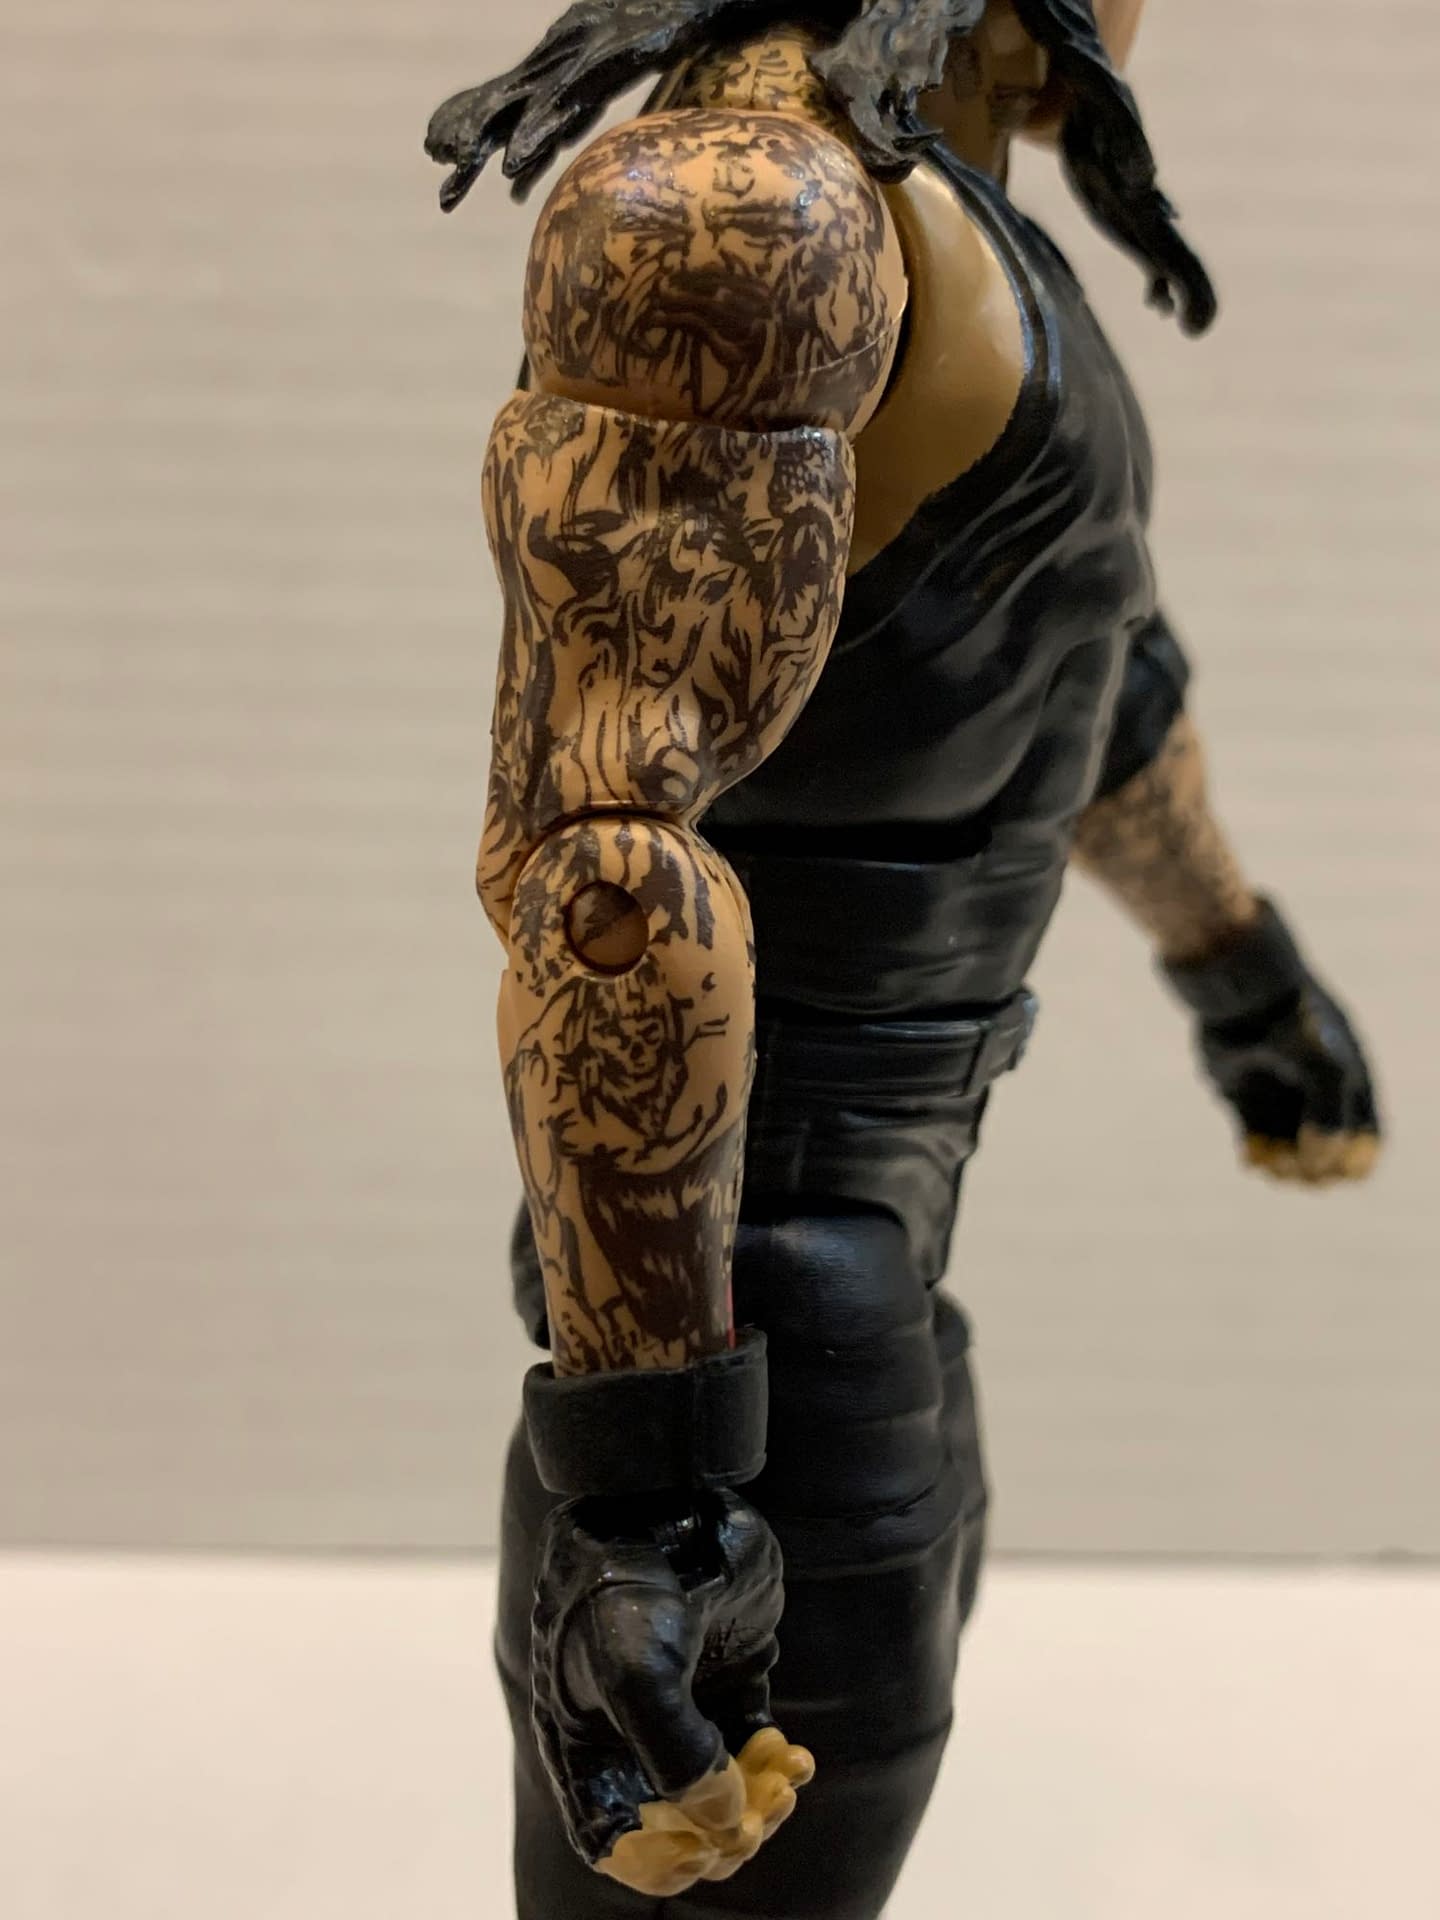 Mattel Pays Tribute To The Undertaker With Two New Elite Figures